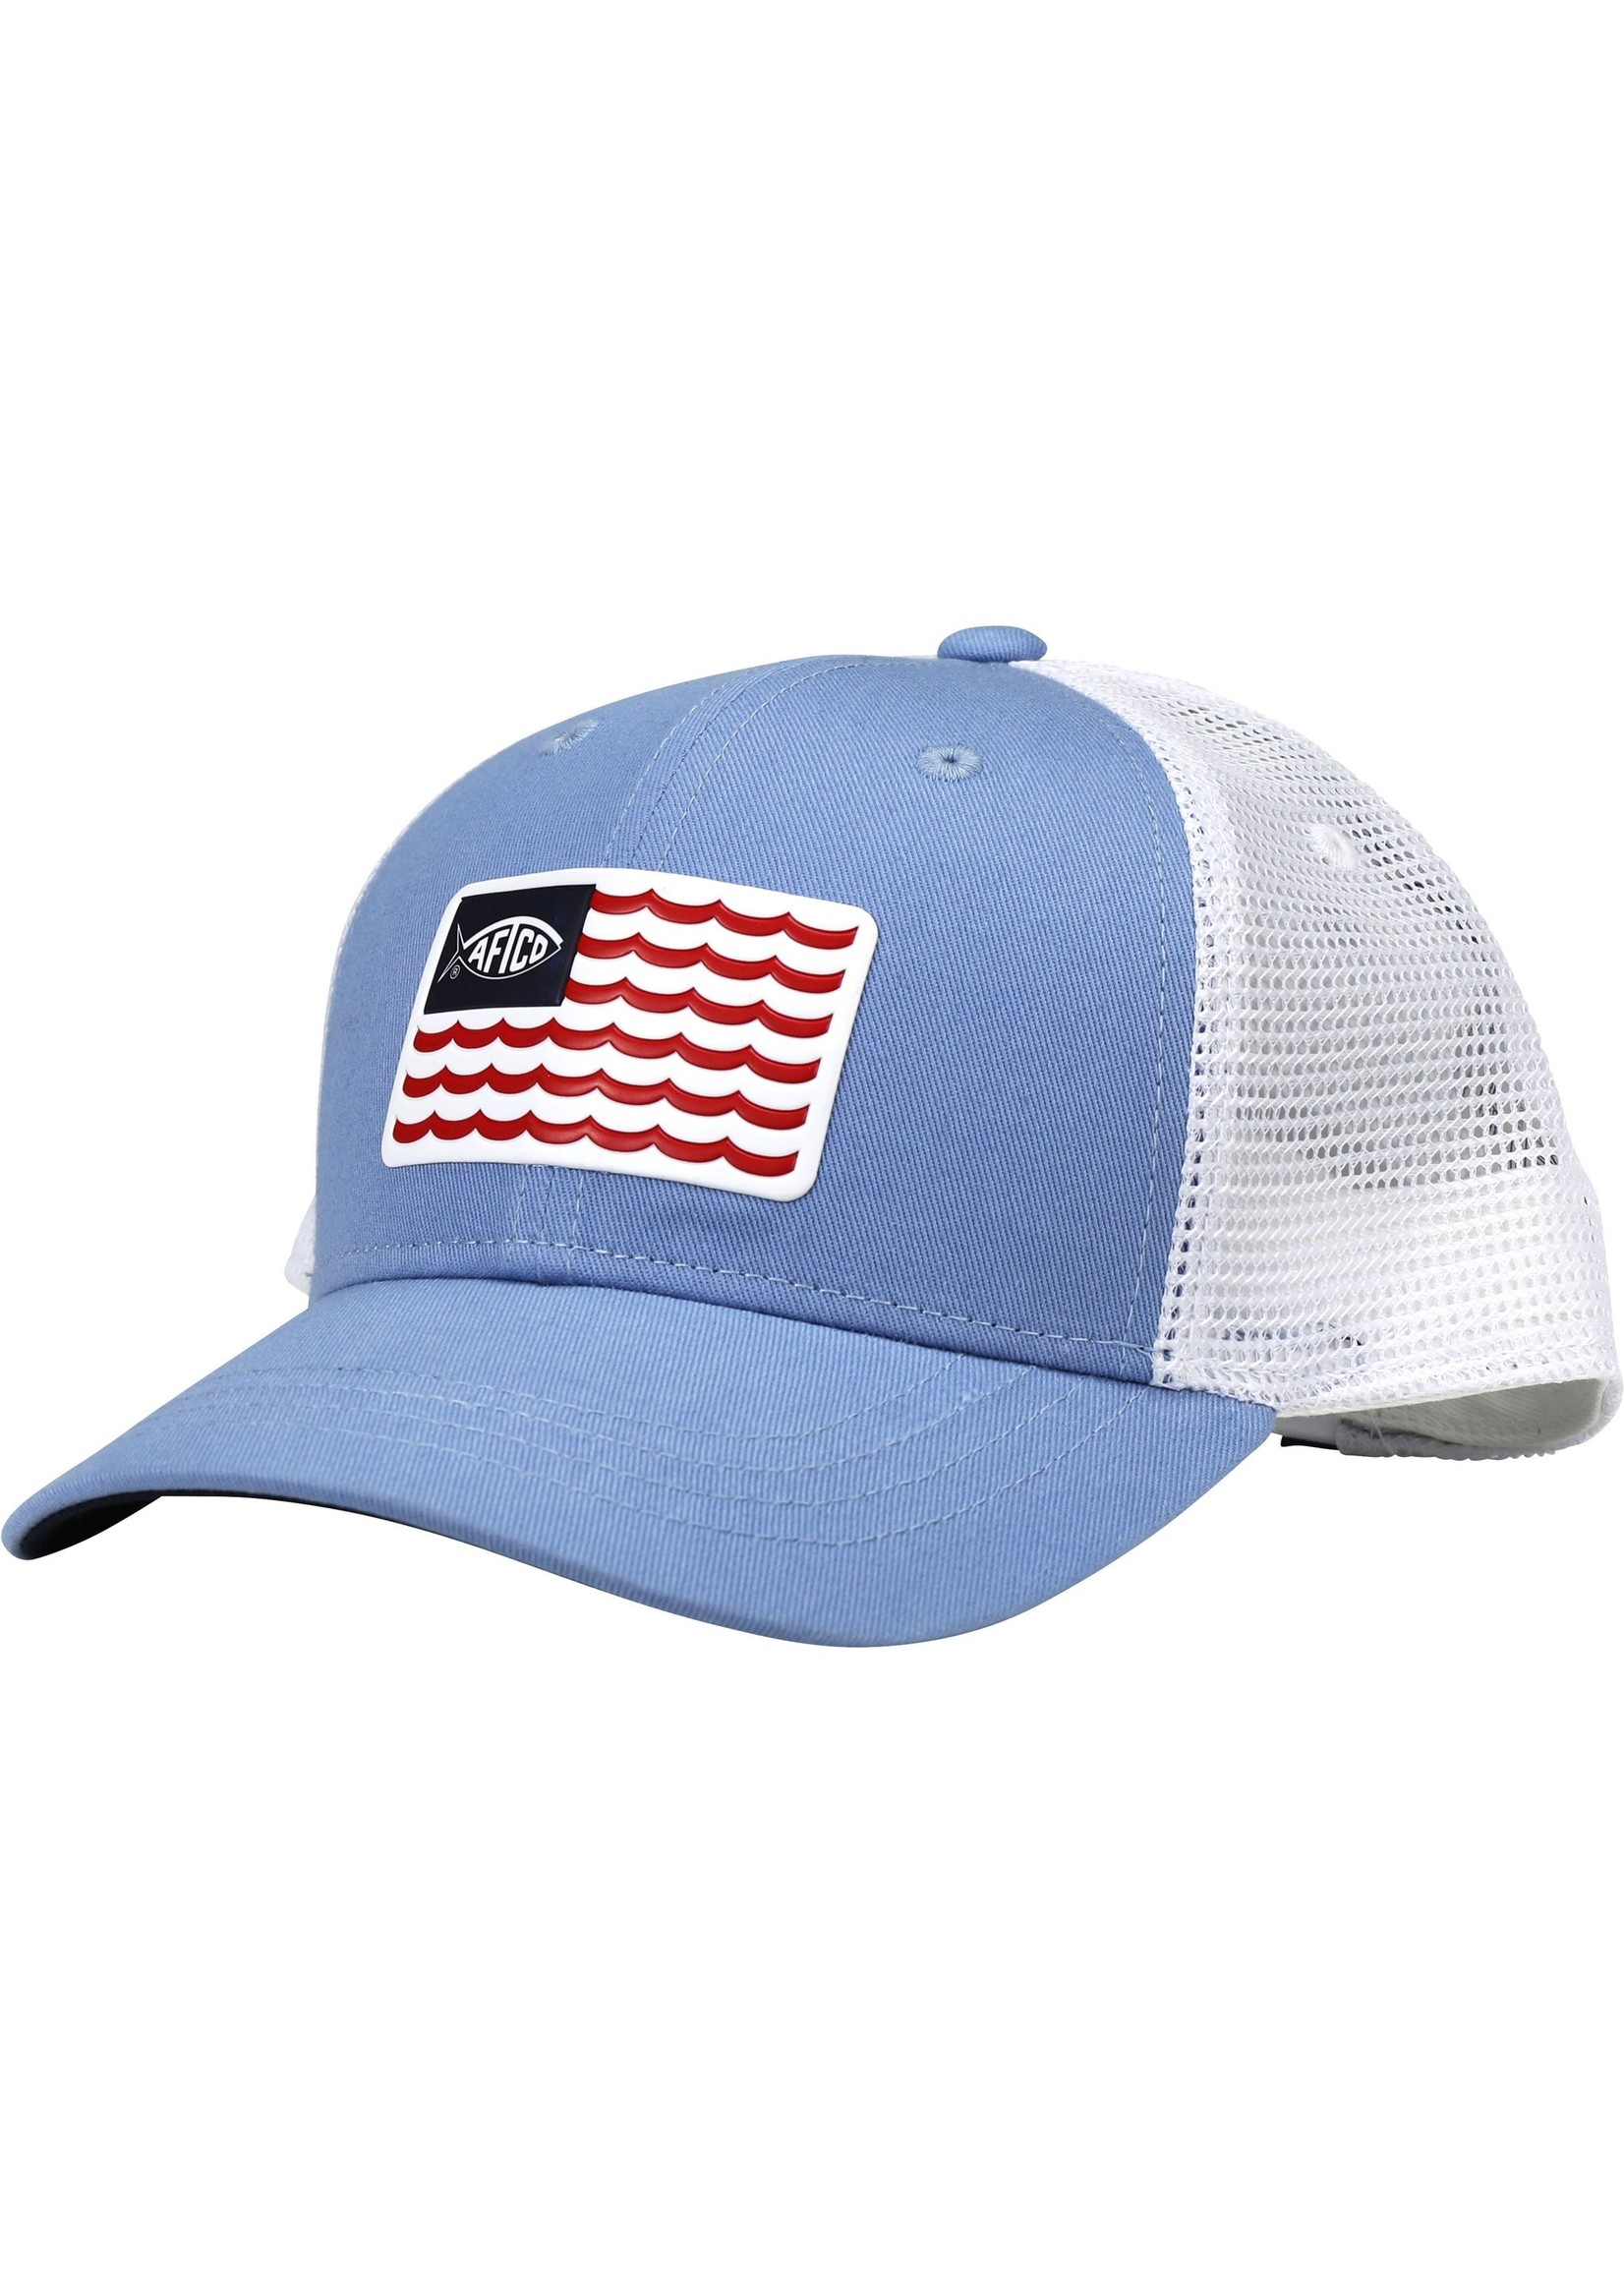 AFTCO YOUTH Canton Trucker Hat